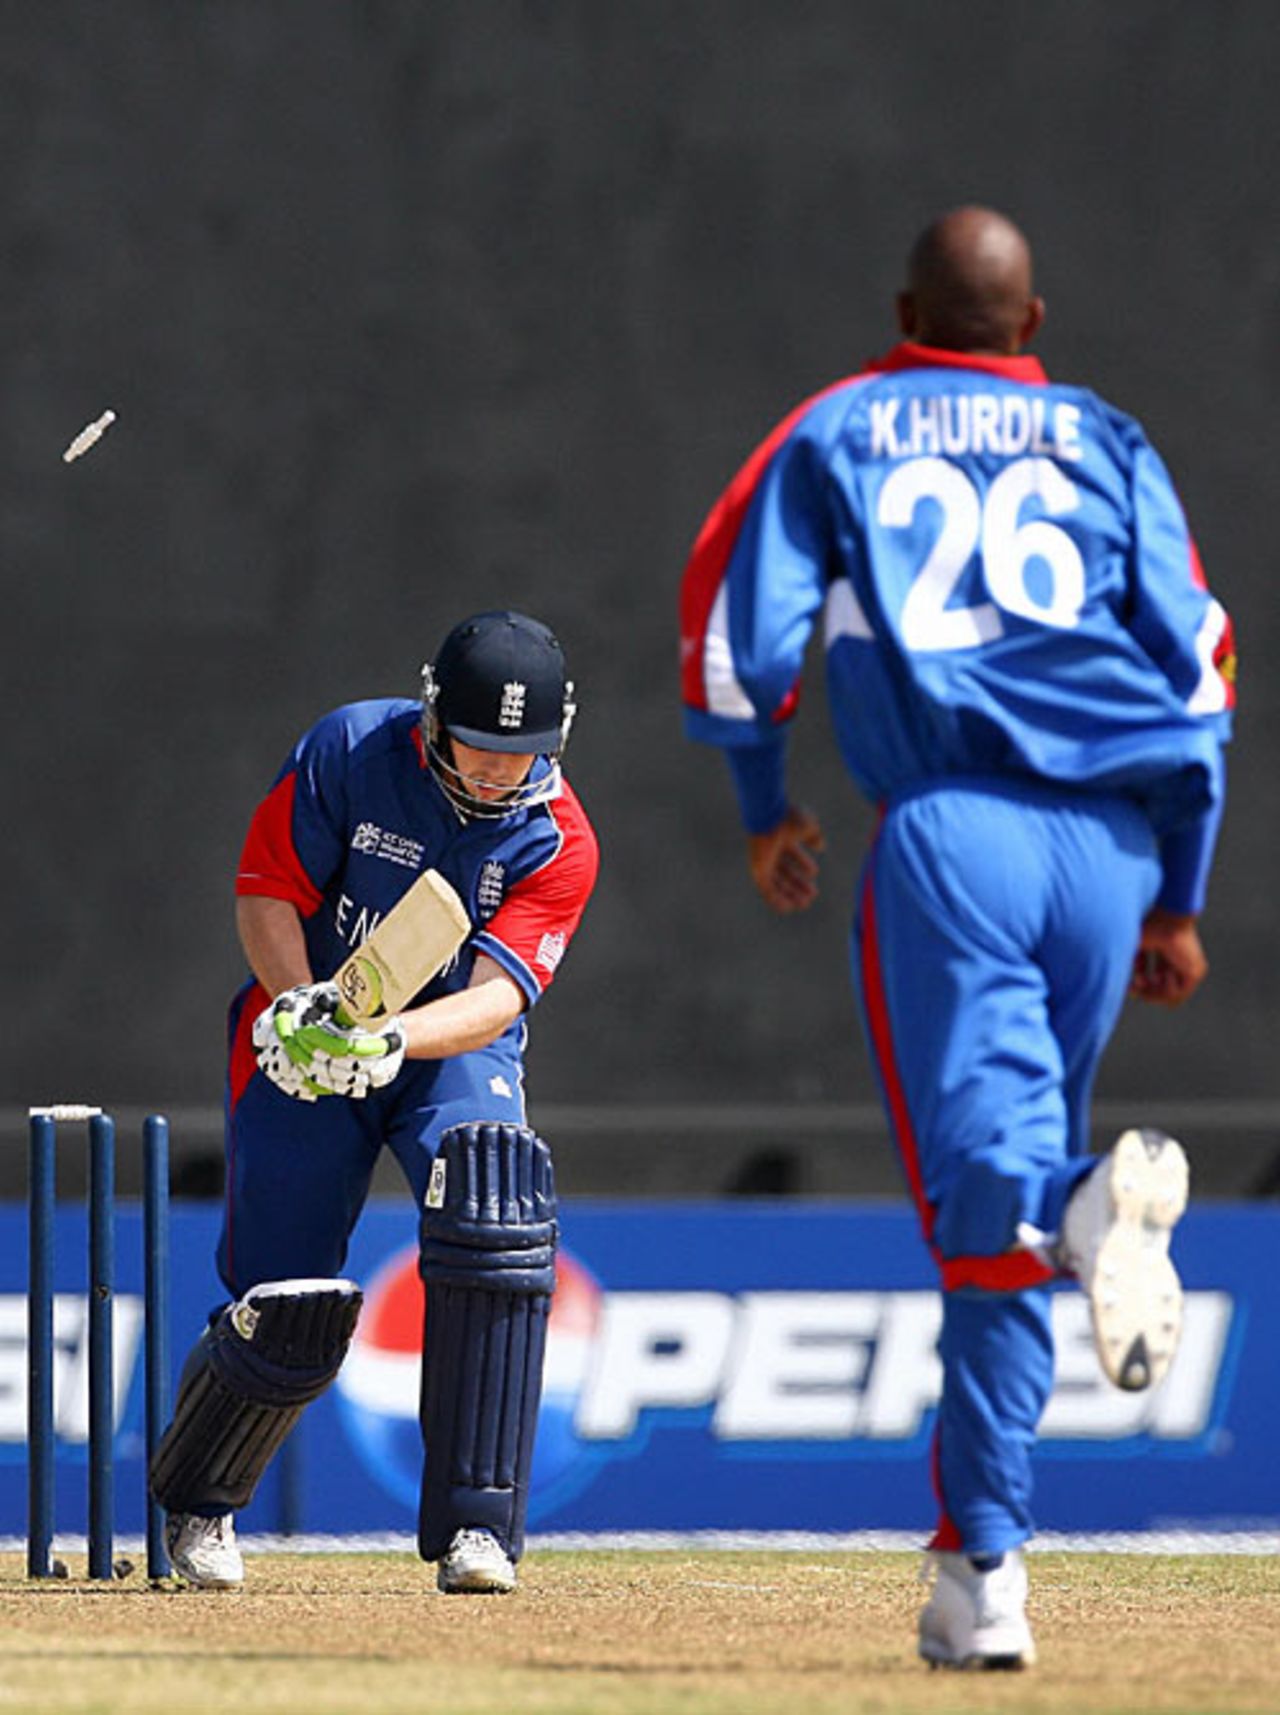 Ed Joyce is bowled by Kevin Hurdle, England v Bermuda, World Cup warm-up, Arnos Vale, March 5, 2007